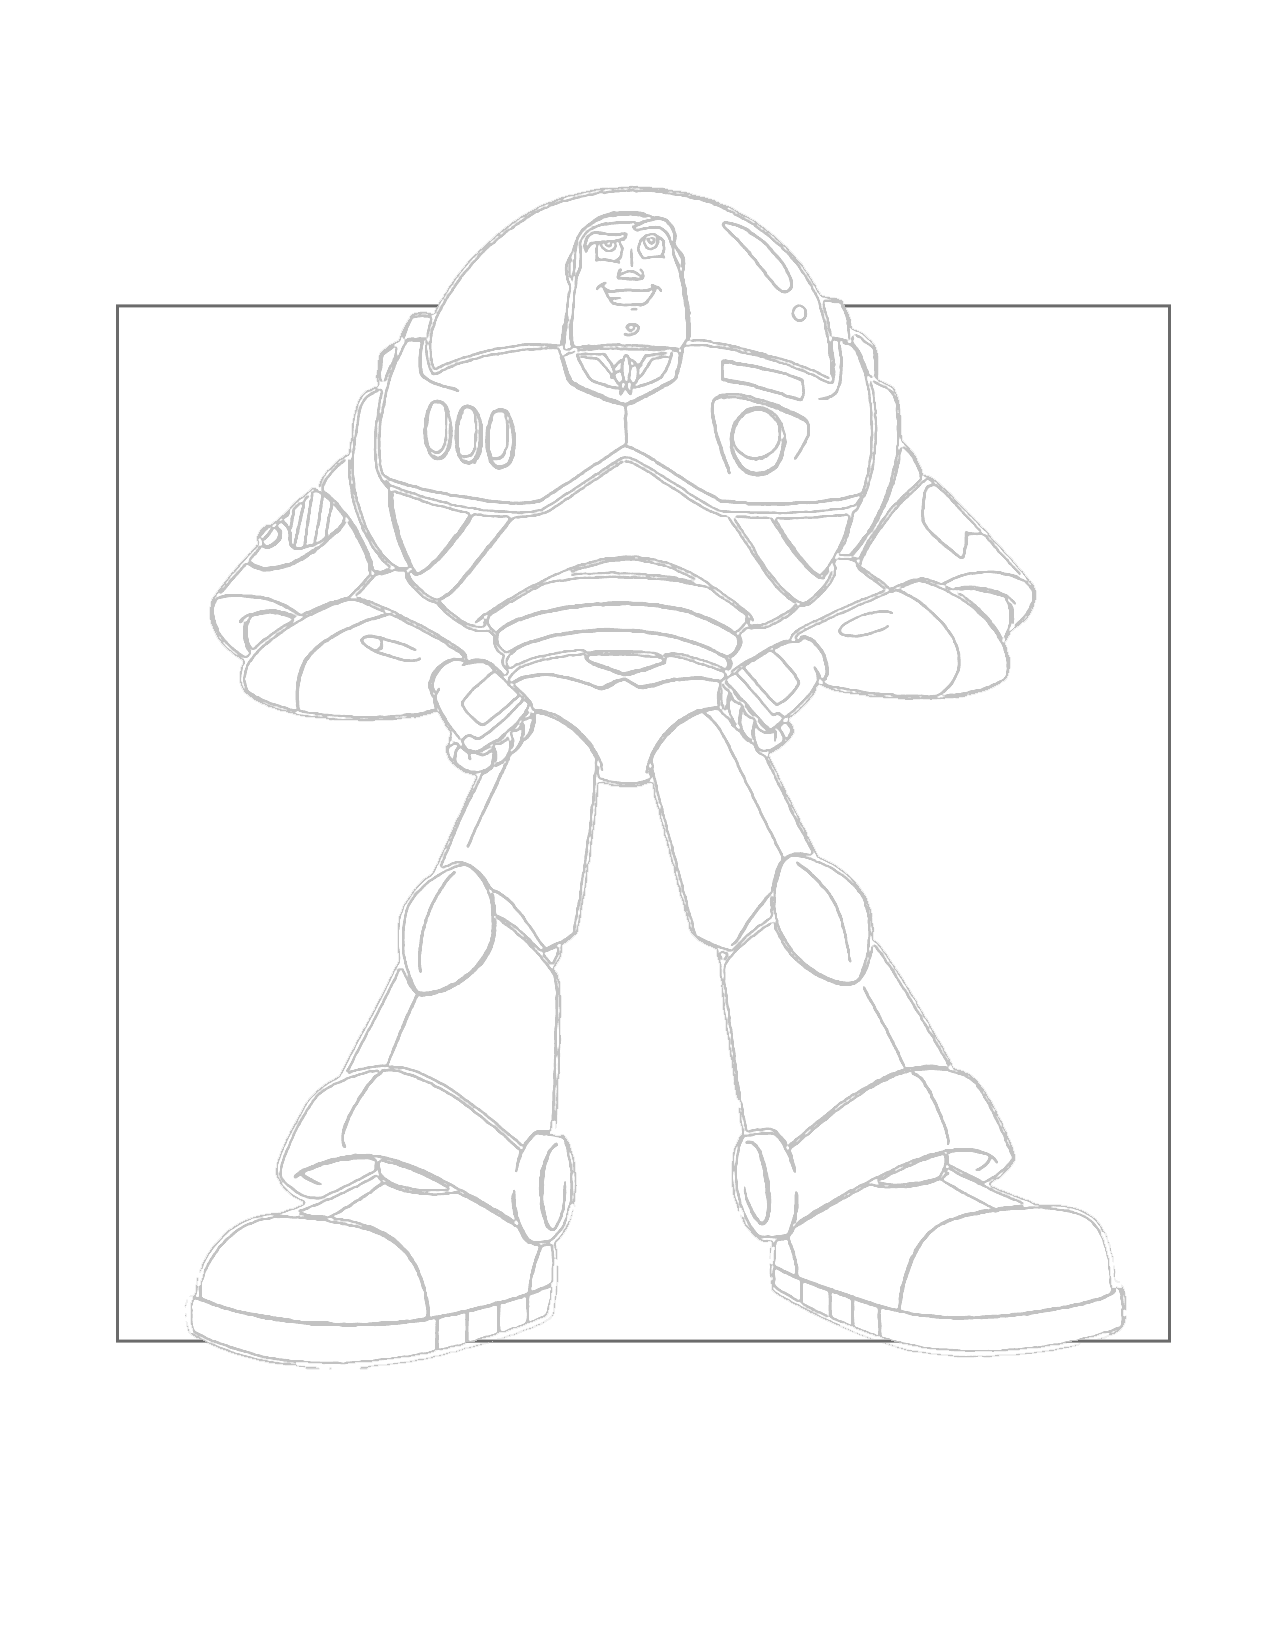 Buzz Lightyear Larger Than Life Traceable Coloring Sheet